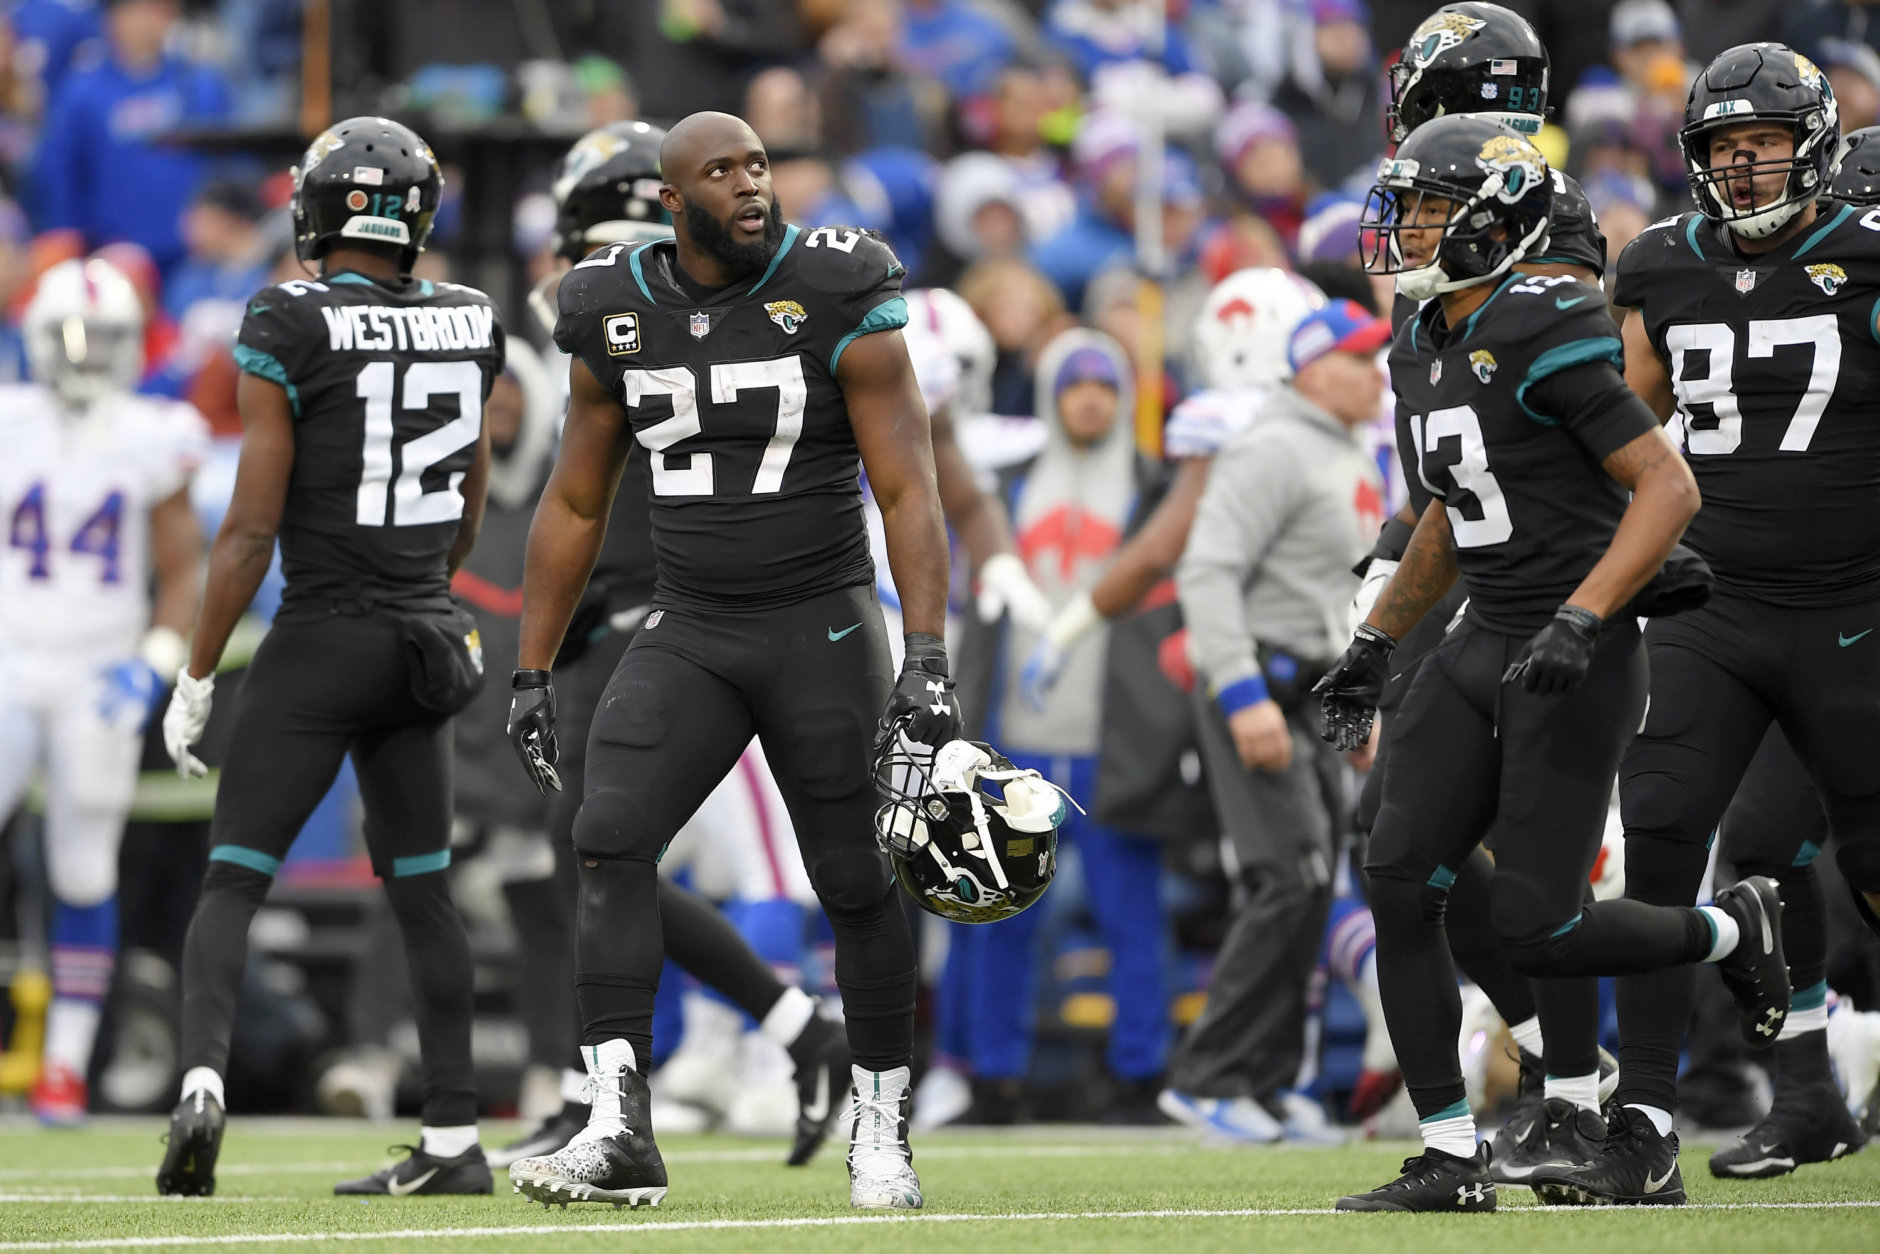 Jacksonville Jaguars running back Leonard Fournette (27) looks on after being ejected from the game after an altercation with Buffalo Bills defensive end Shaq Lawson, not pictured, during the second half of an NFL football game, Sunday, Nov. 25, 2018, in Orchard Park, N.Y. (AP Photo/Adrian Kraus)